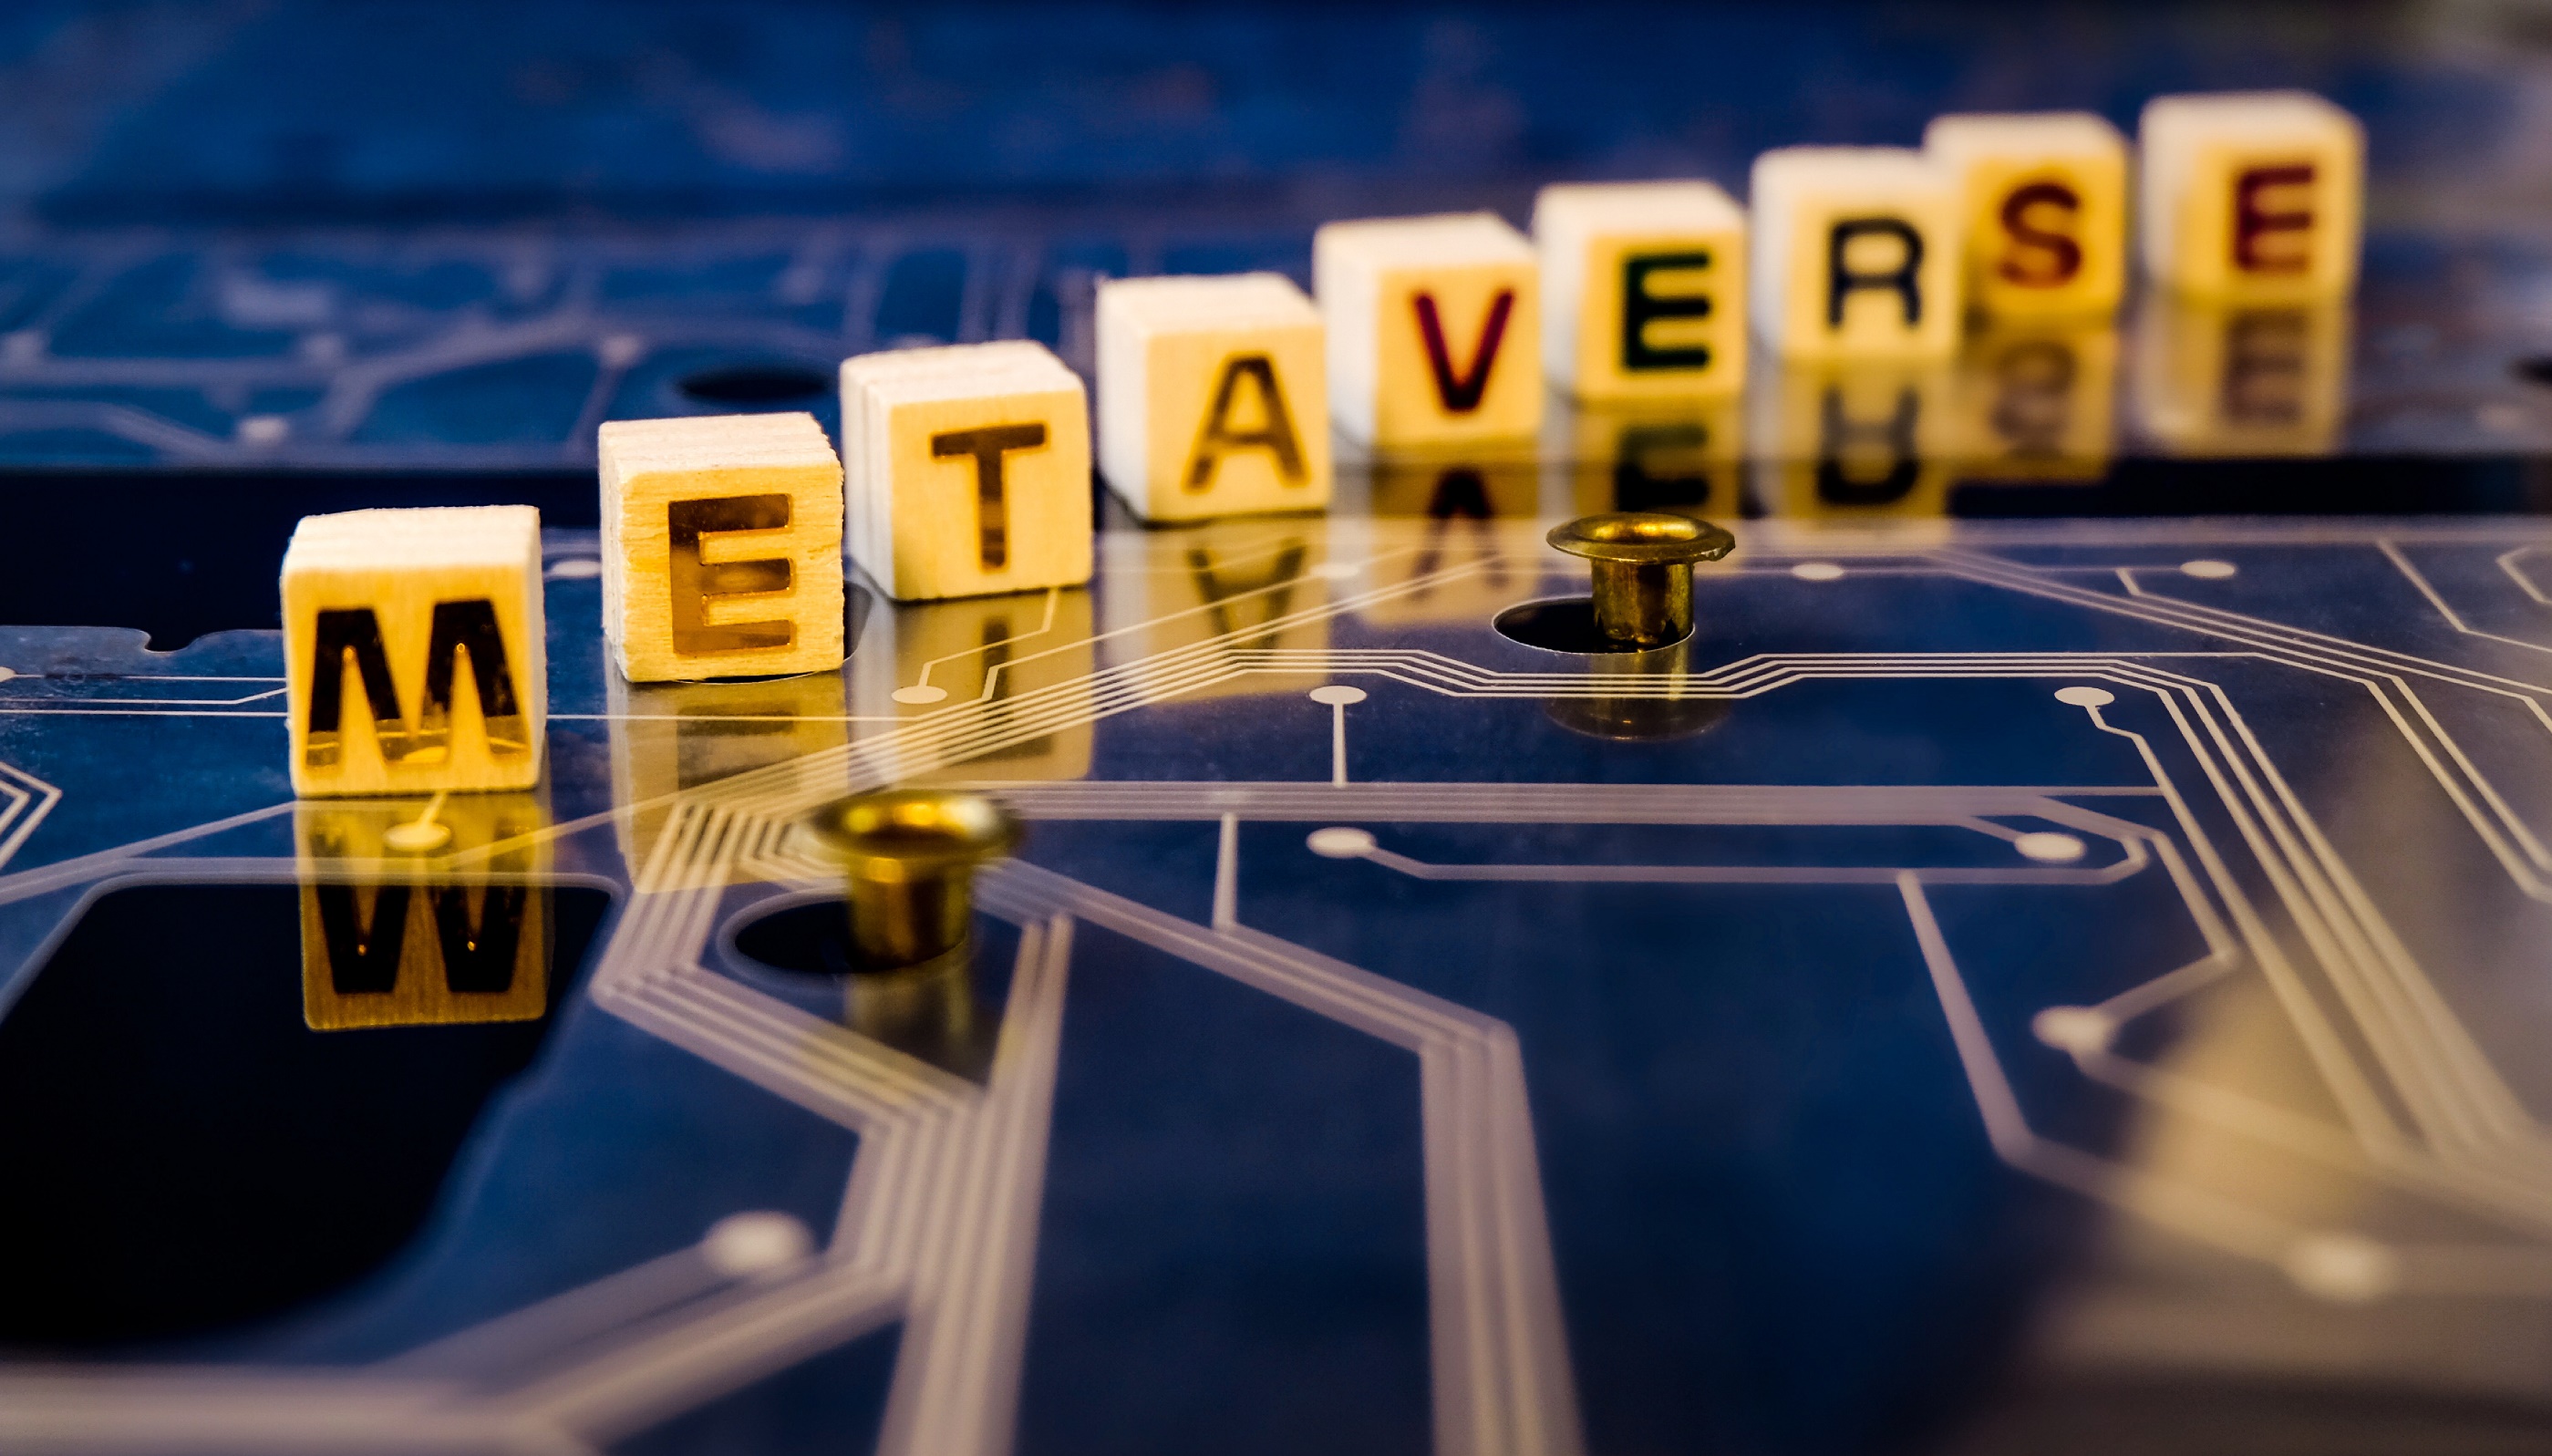 The Impact of Metaverse on the Travel Industry